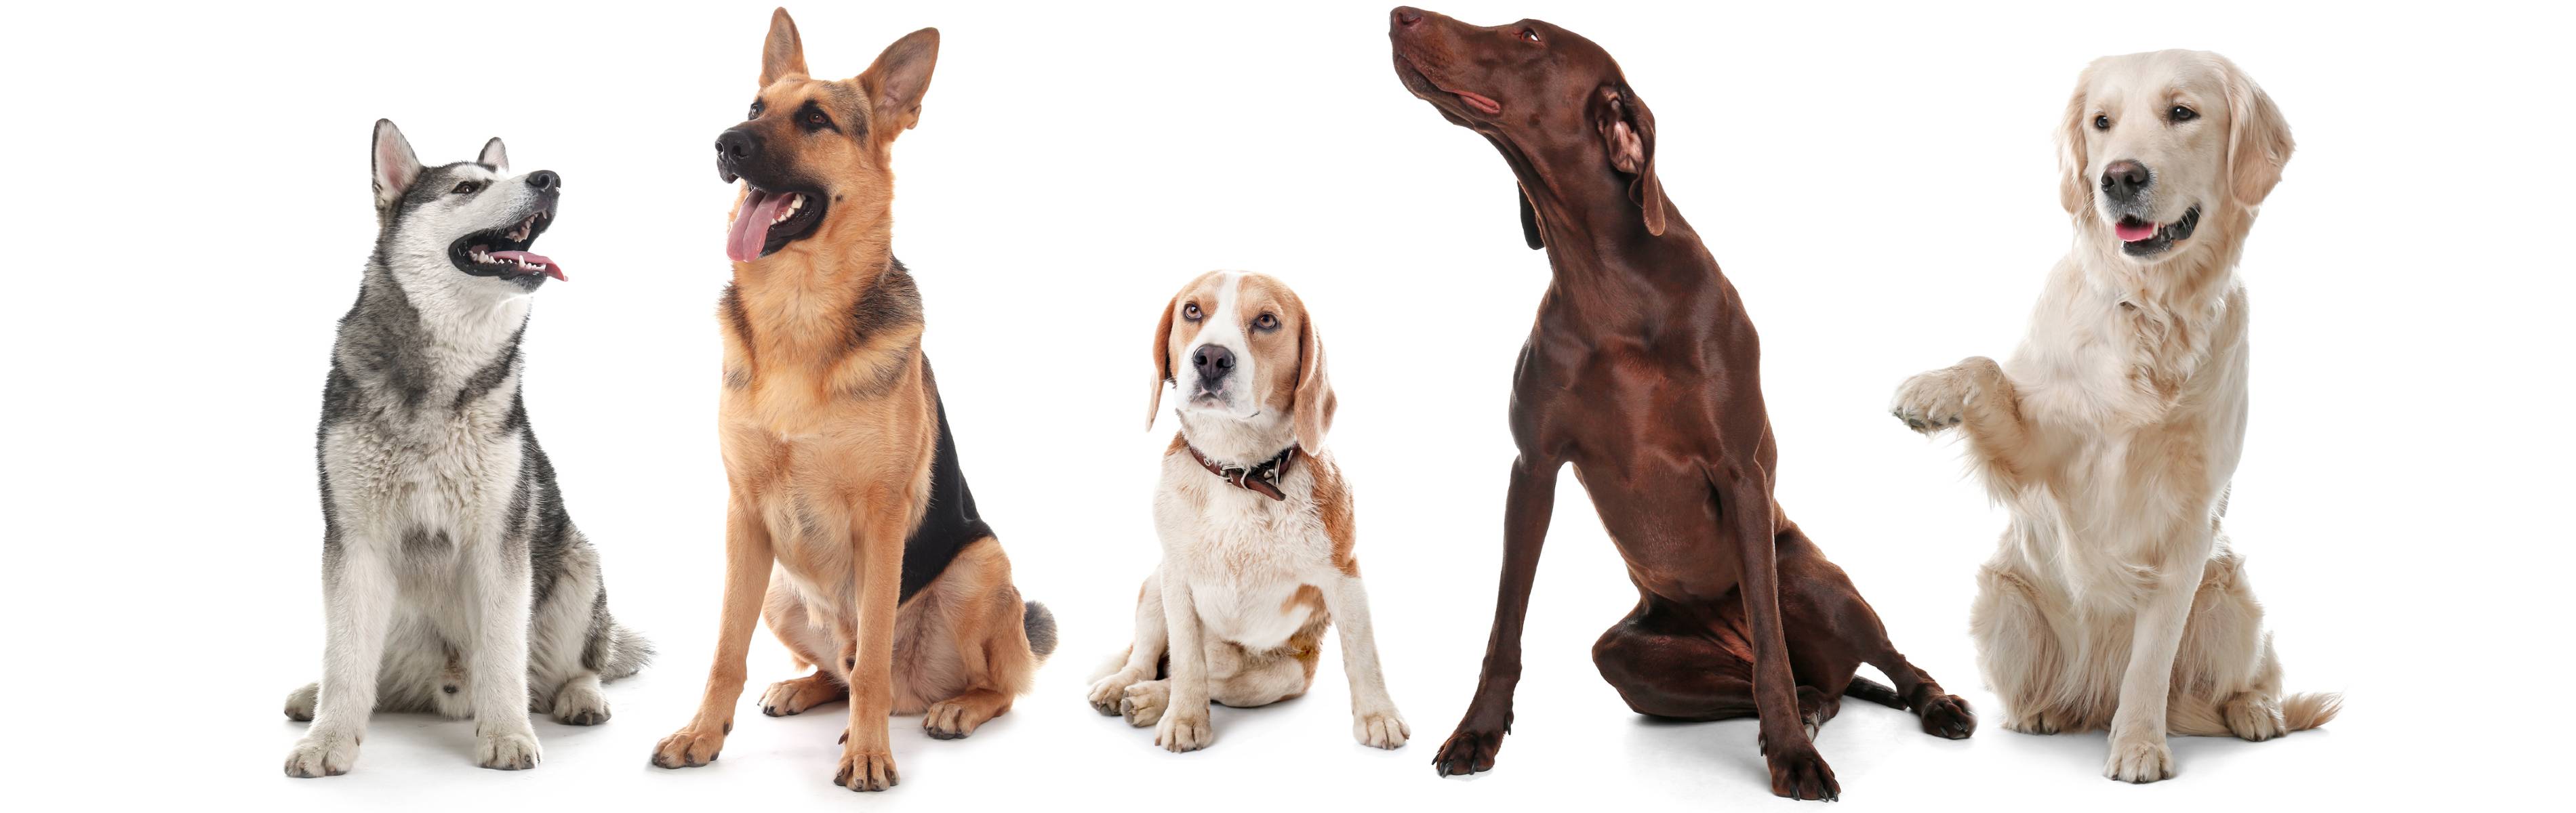 A row of obedient dogs - contact Dog Training Elite today to enroll your dog in one of our expert dog training programs.